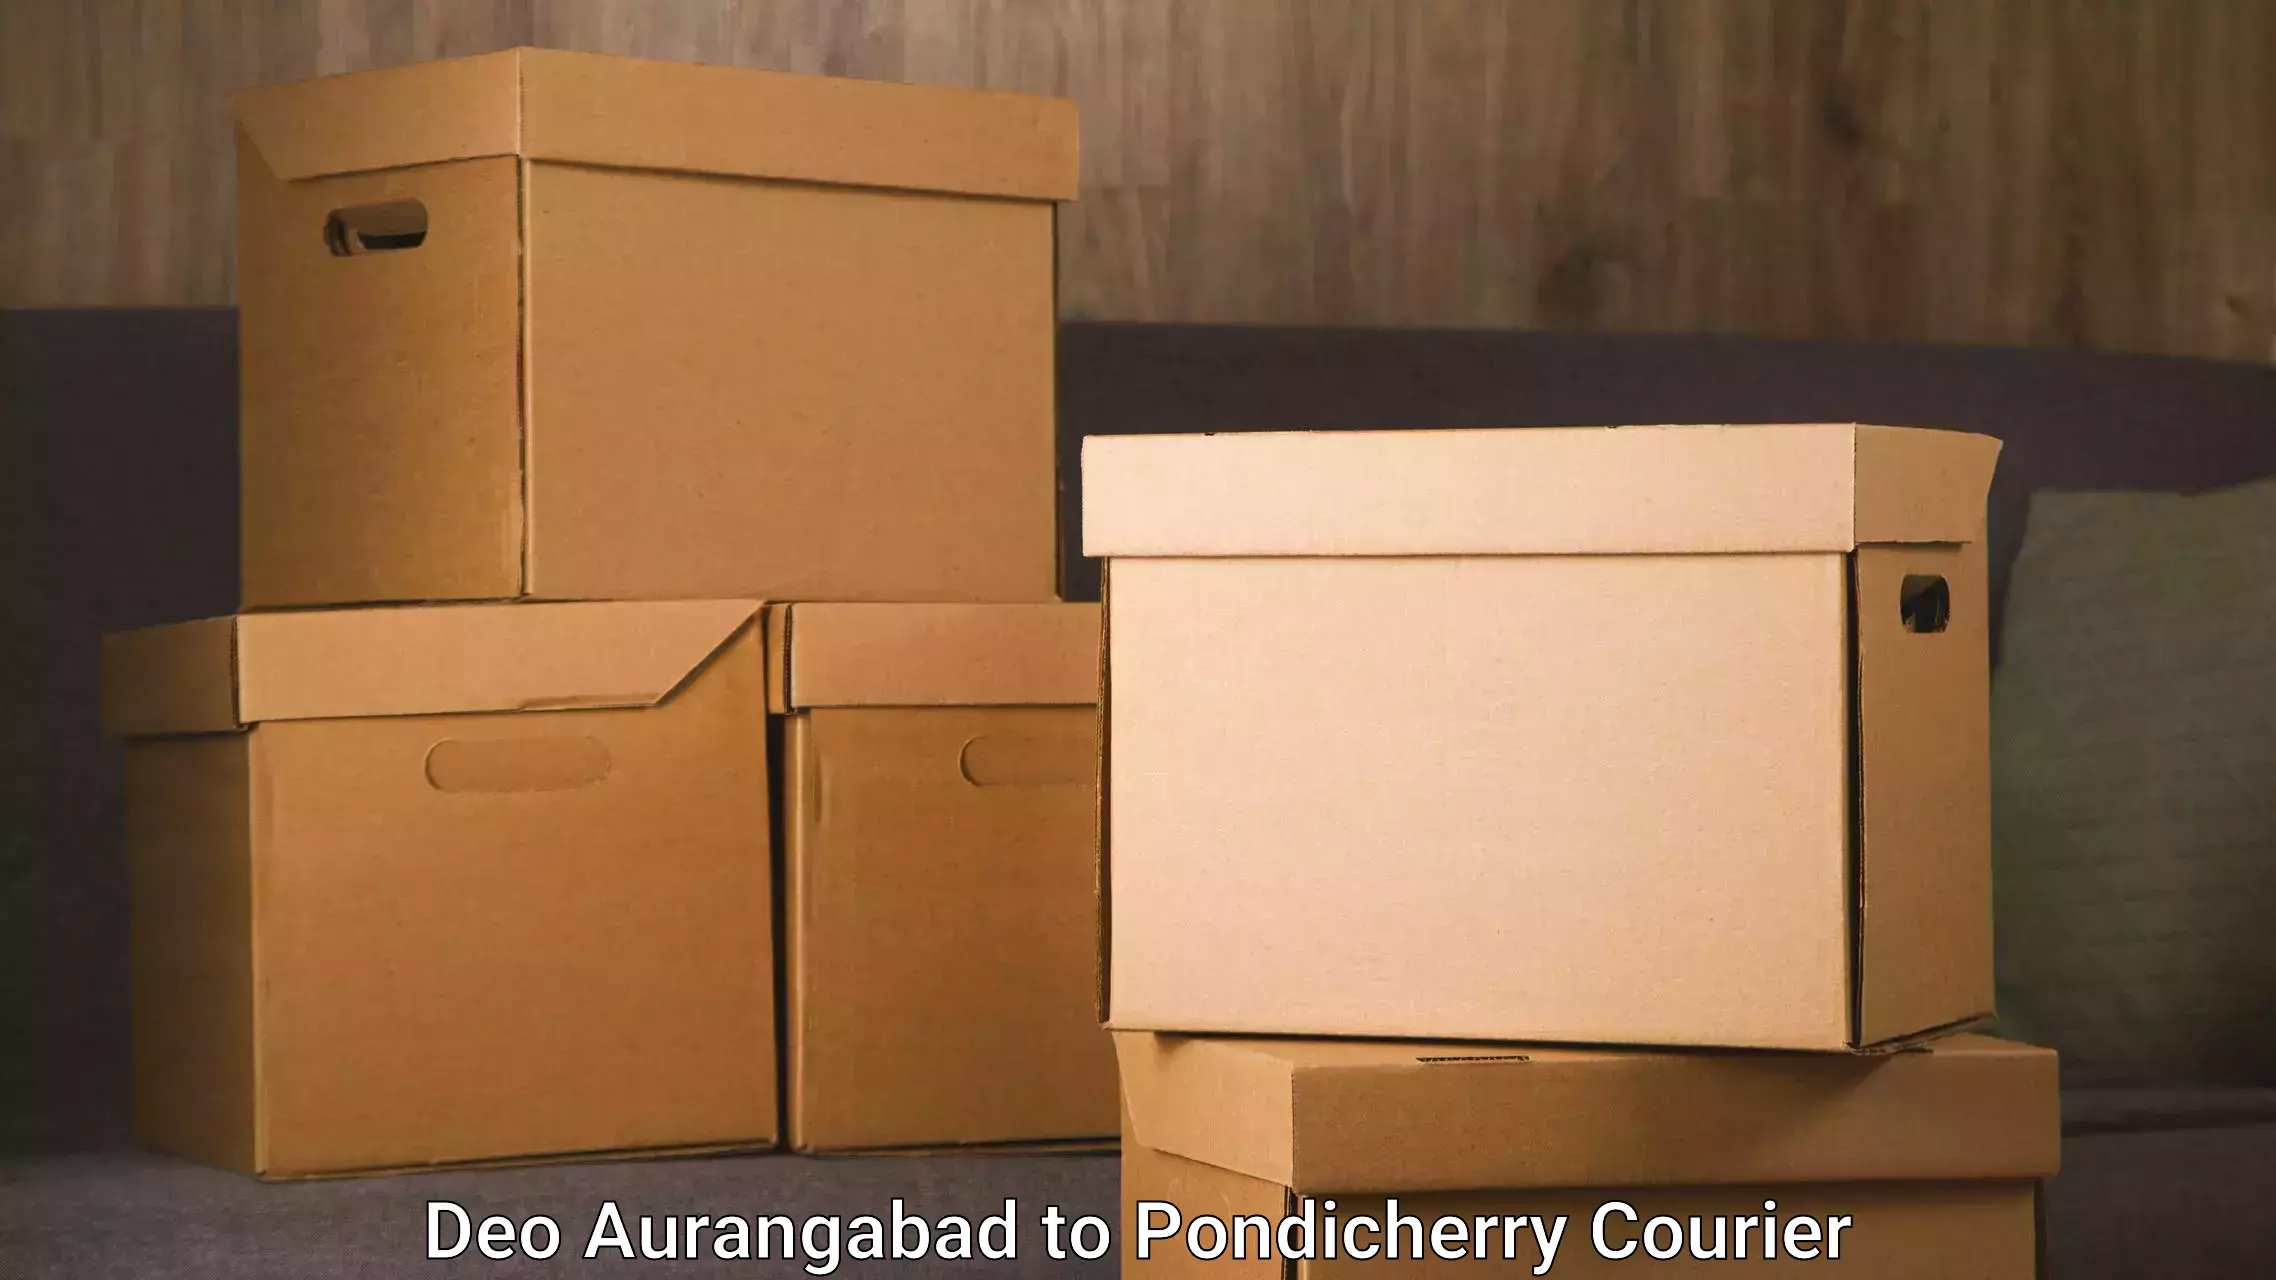 Furniture moving specialists Deo Aurangabad to Pondicherry